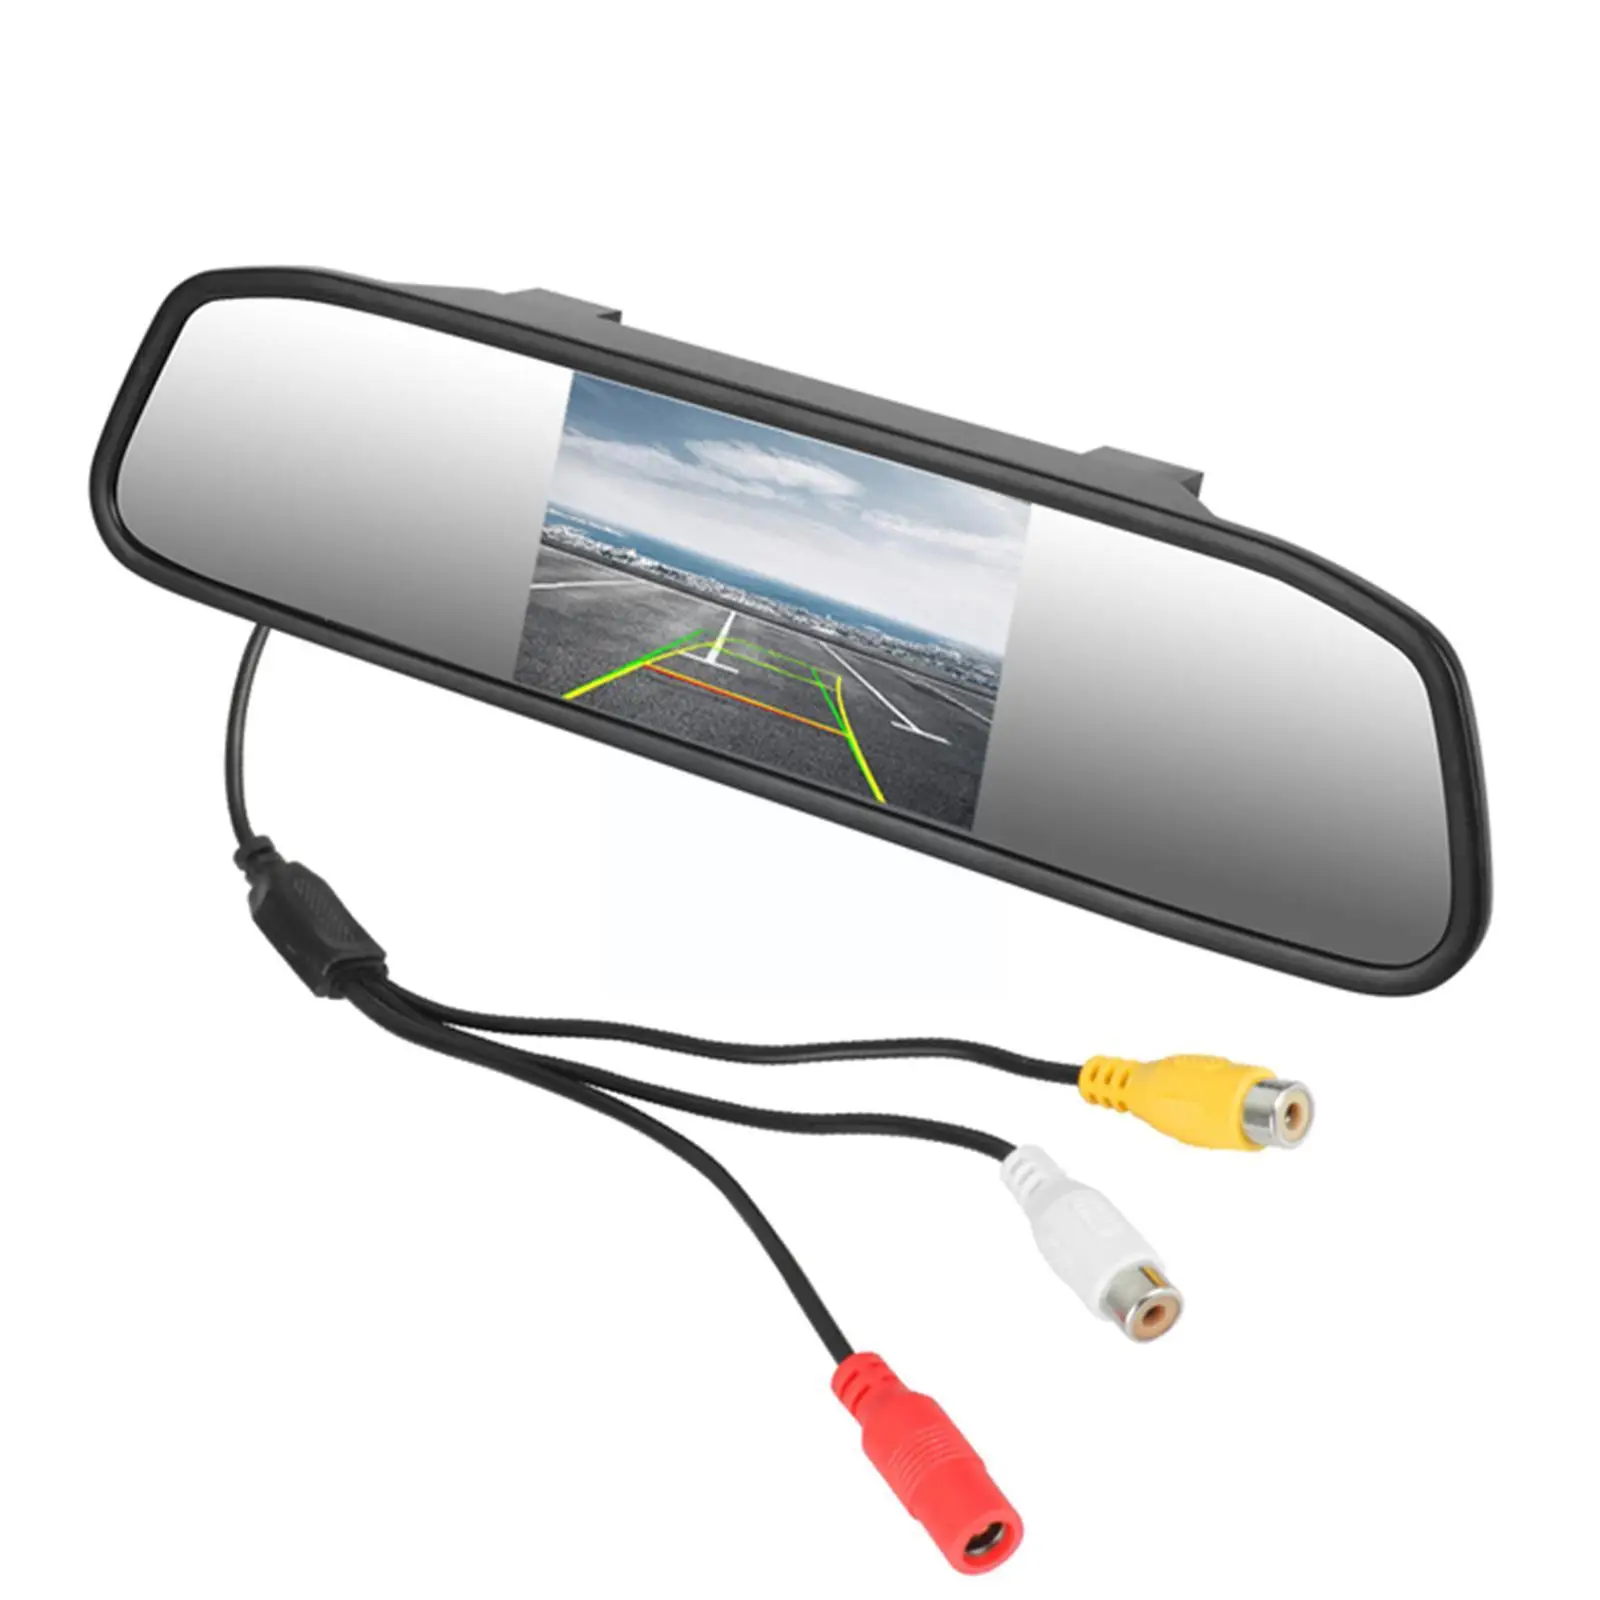 Car Video Auto Parking Monitor Led Night Rearview Rear Ccd 5